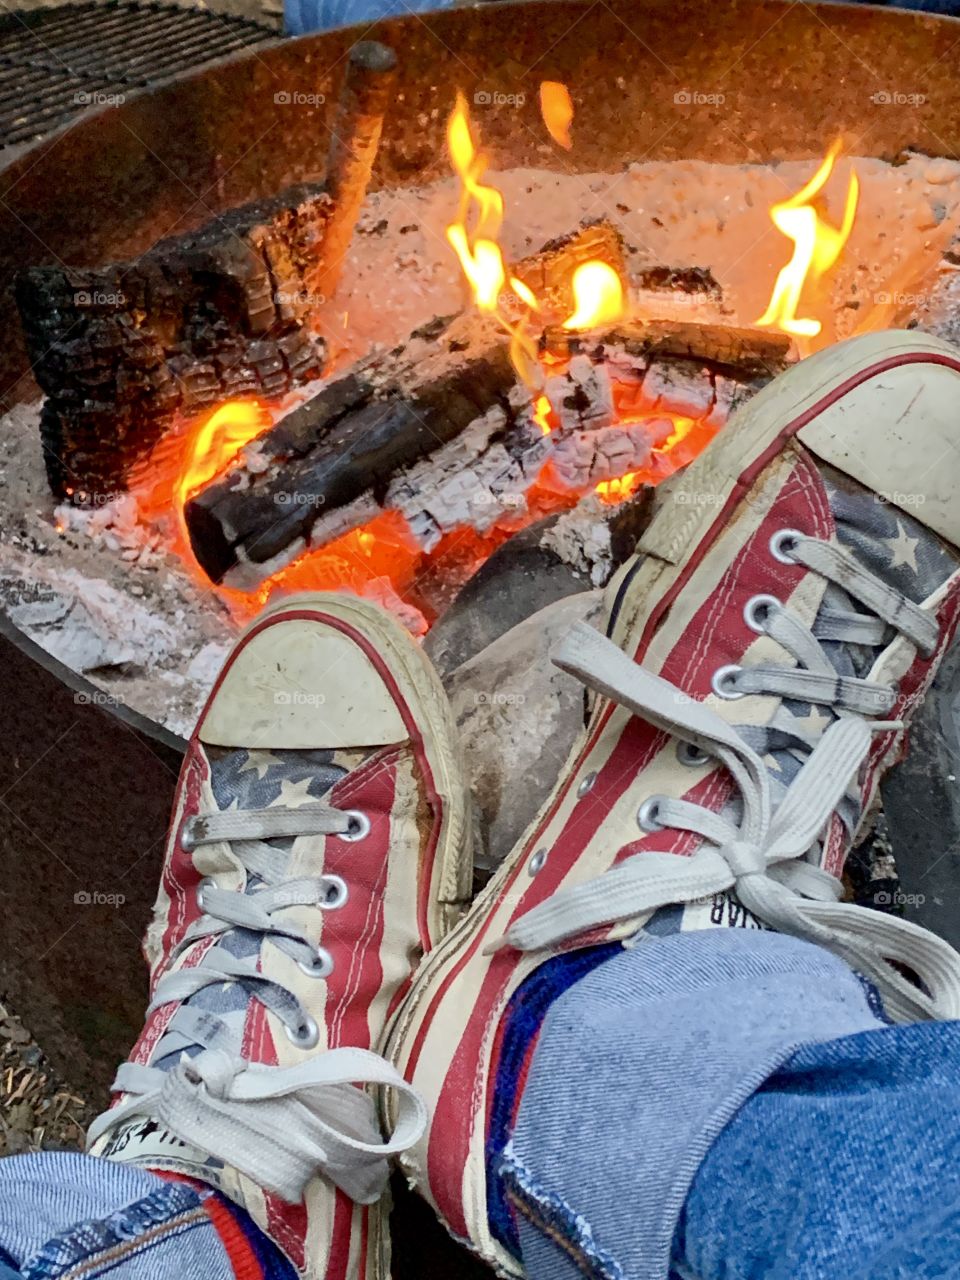 Setting my vans next to a campfire